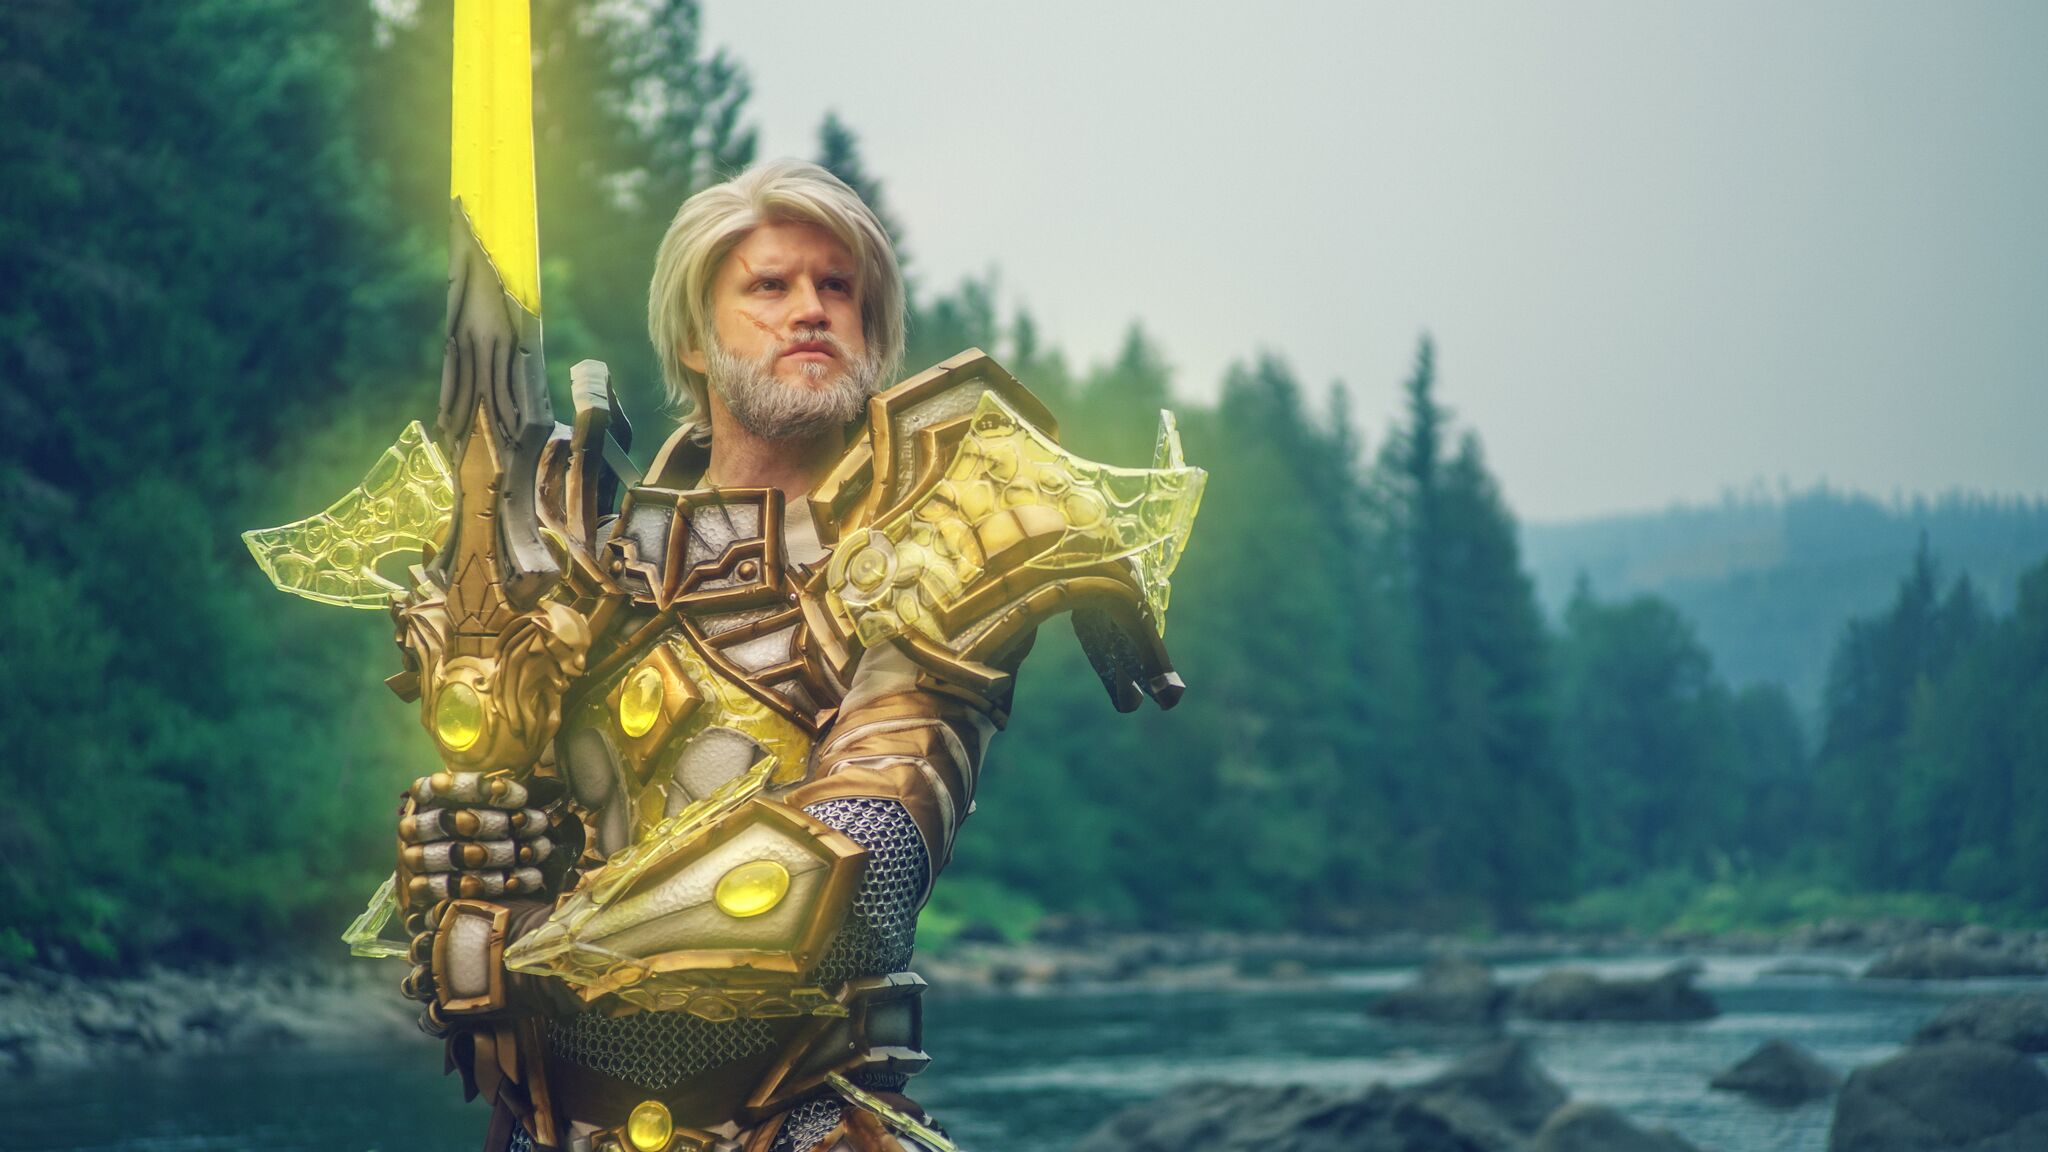 Here’s What Professional World Of Warcraft Cosplay Looks Like